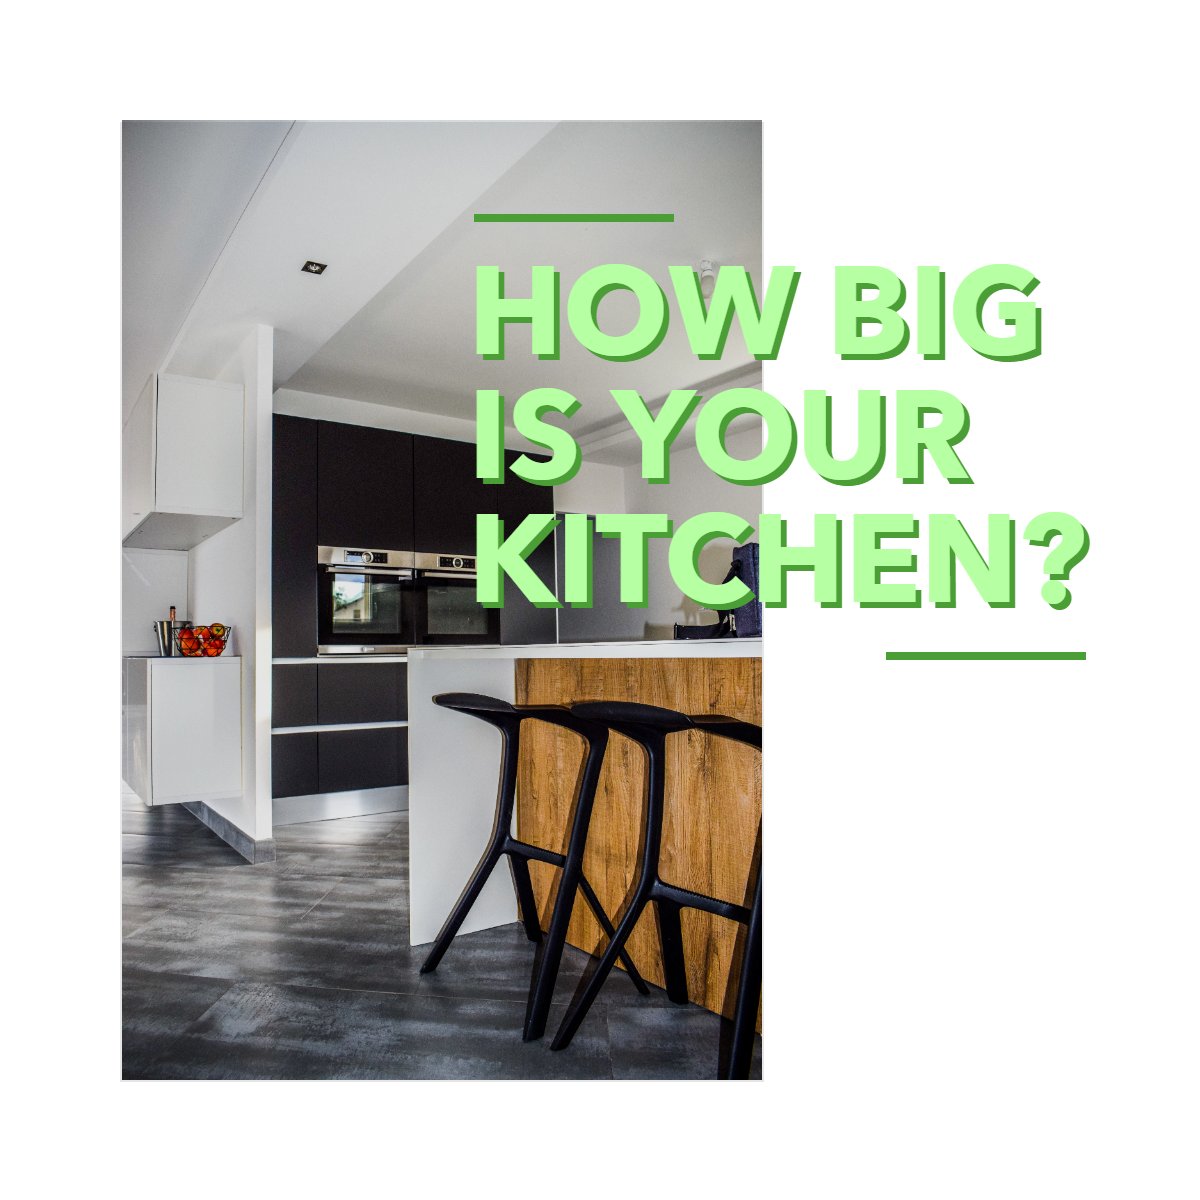 In the US, the average kitchen size for single homes is 161 square feet.

How big is your kitchen? 

#realestate #kitchensize #kitchen #homes
 #callniecie